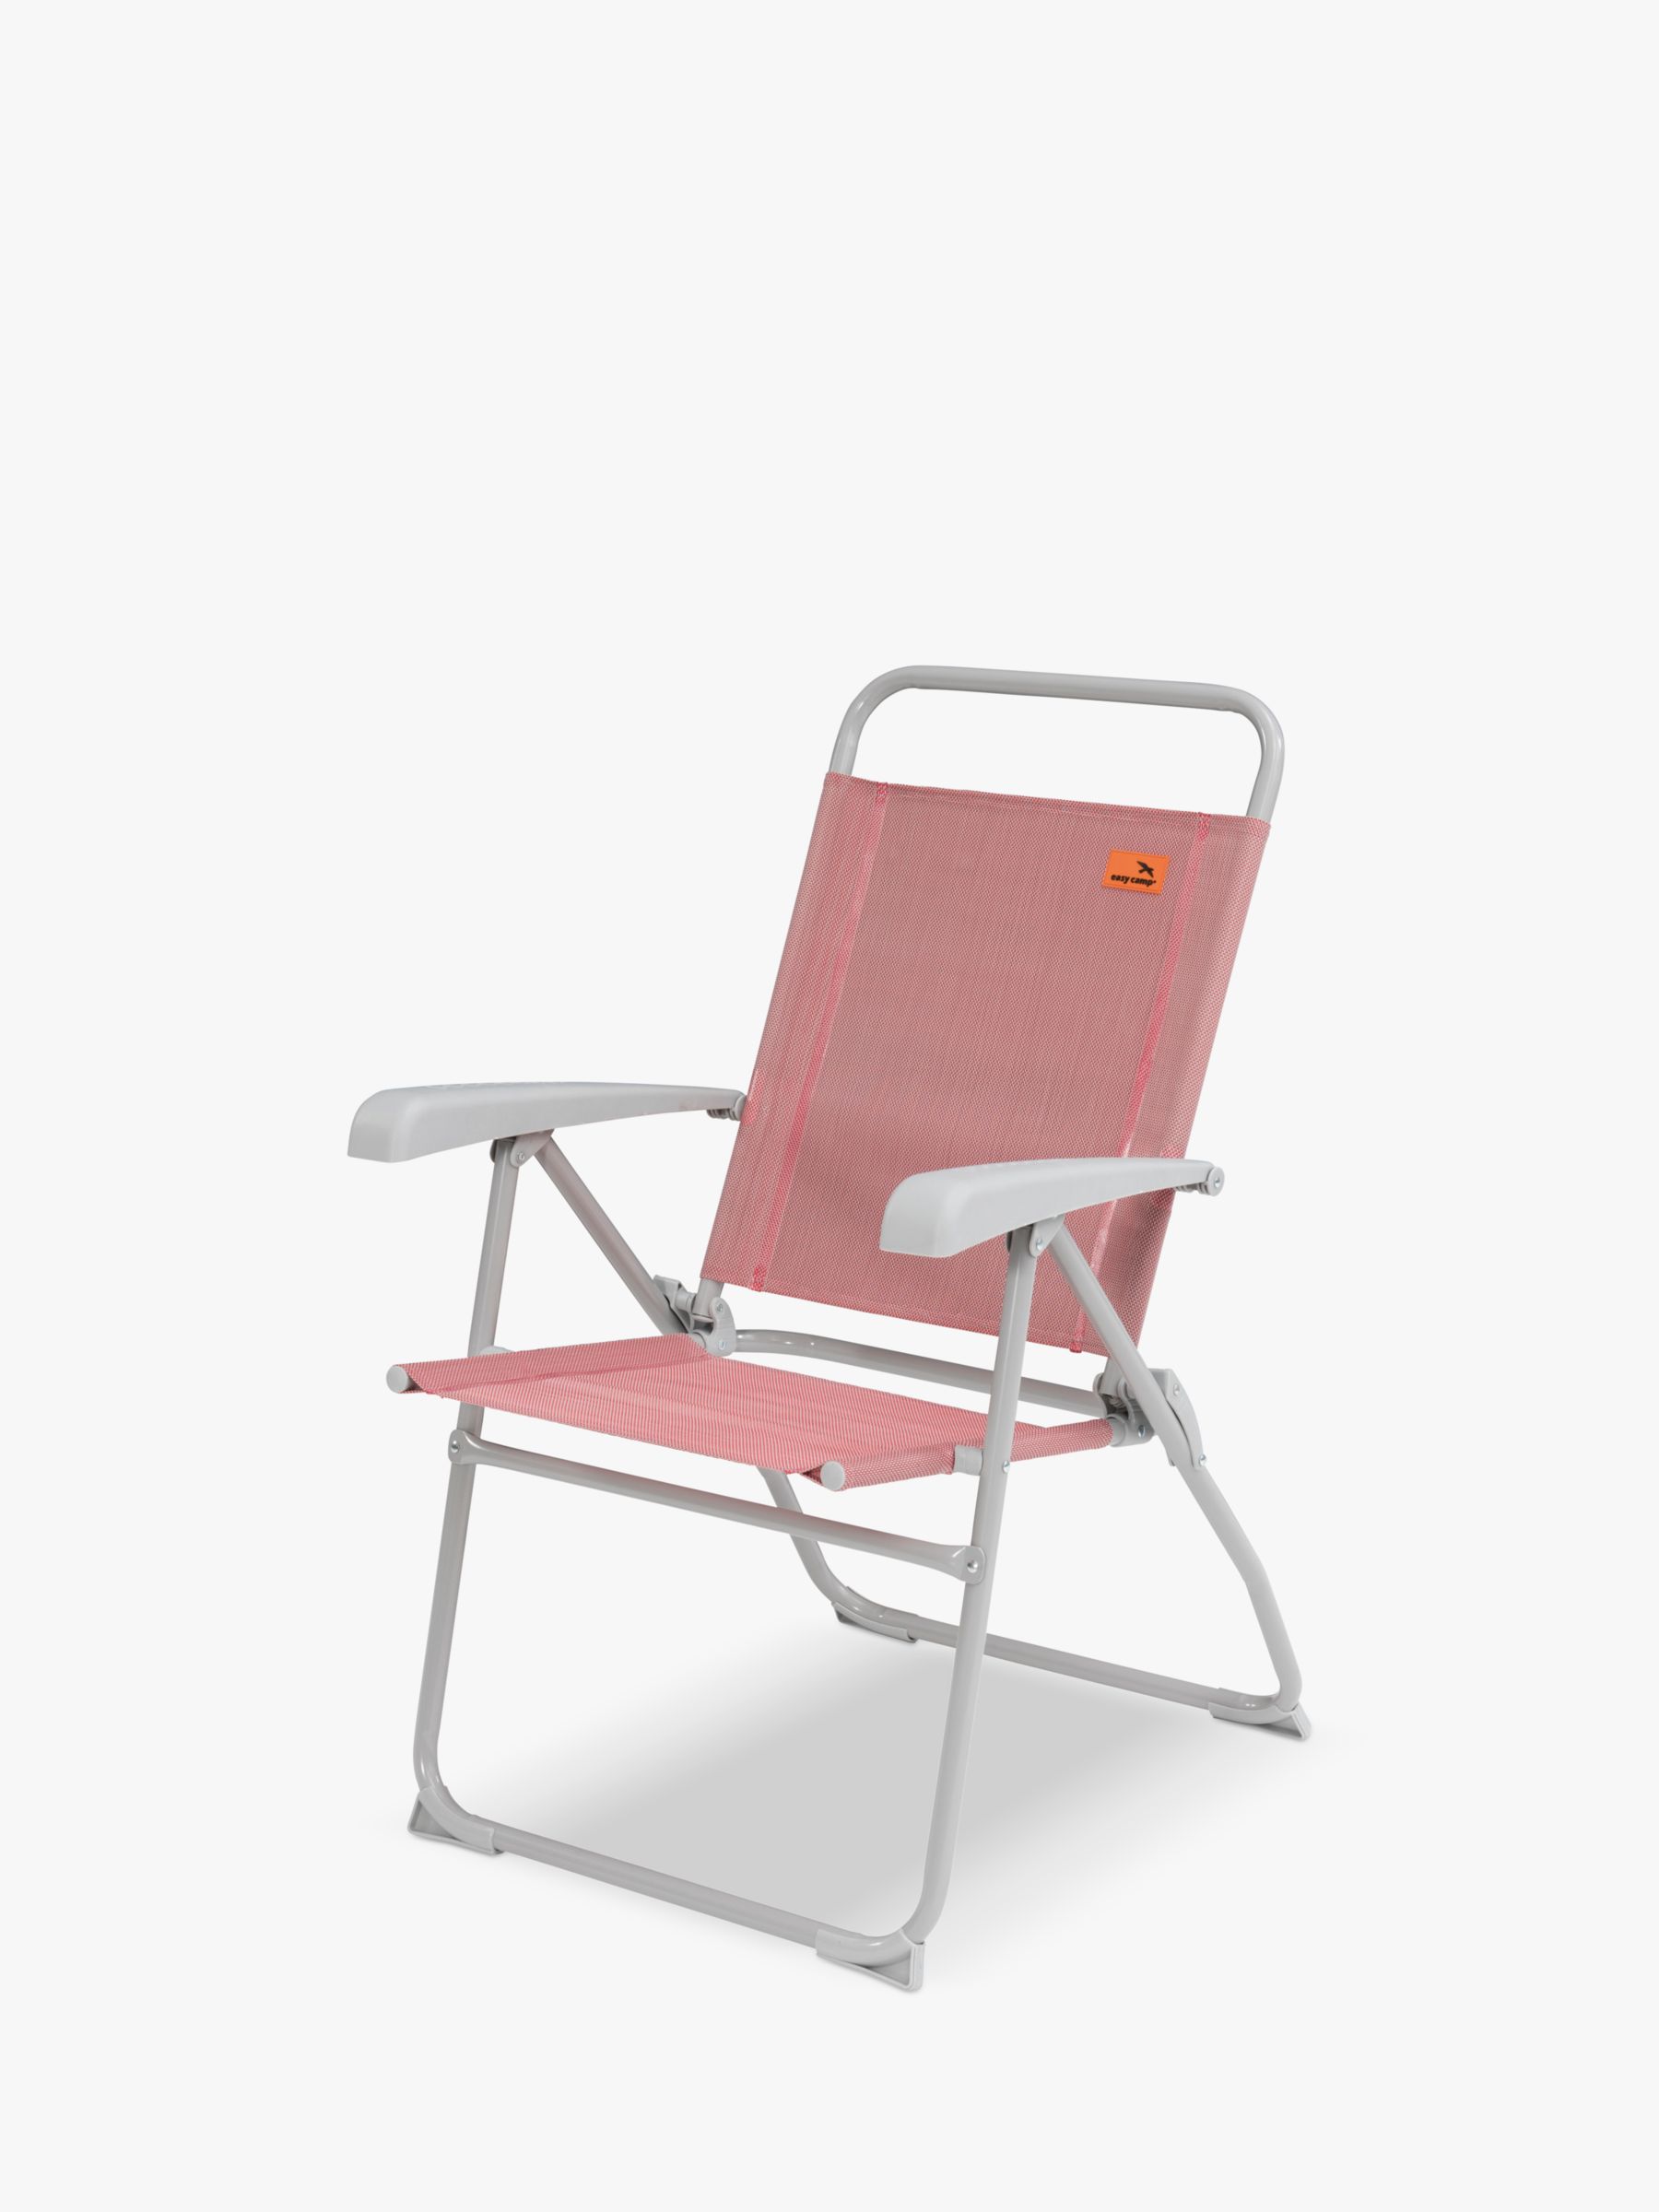 foldable easy chairs online